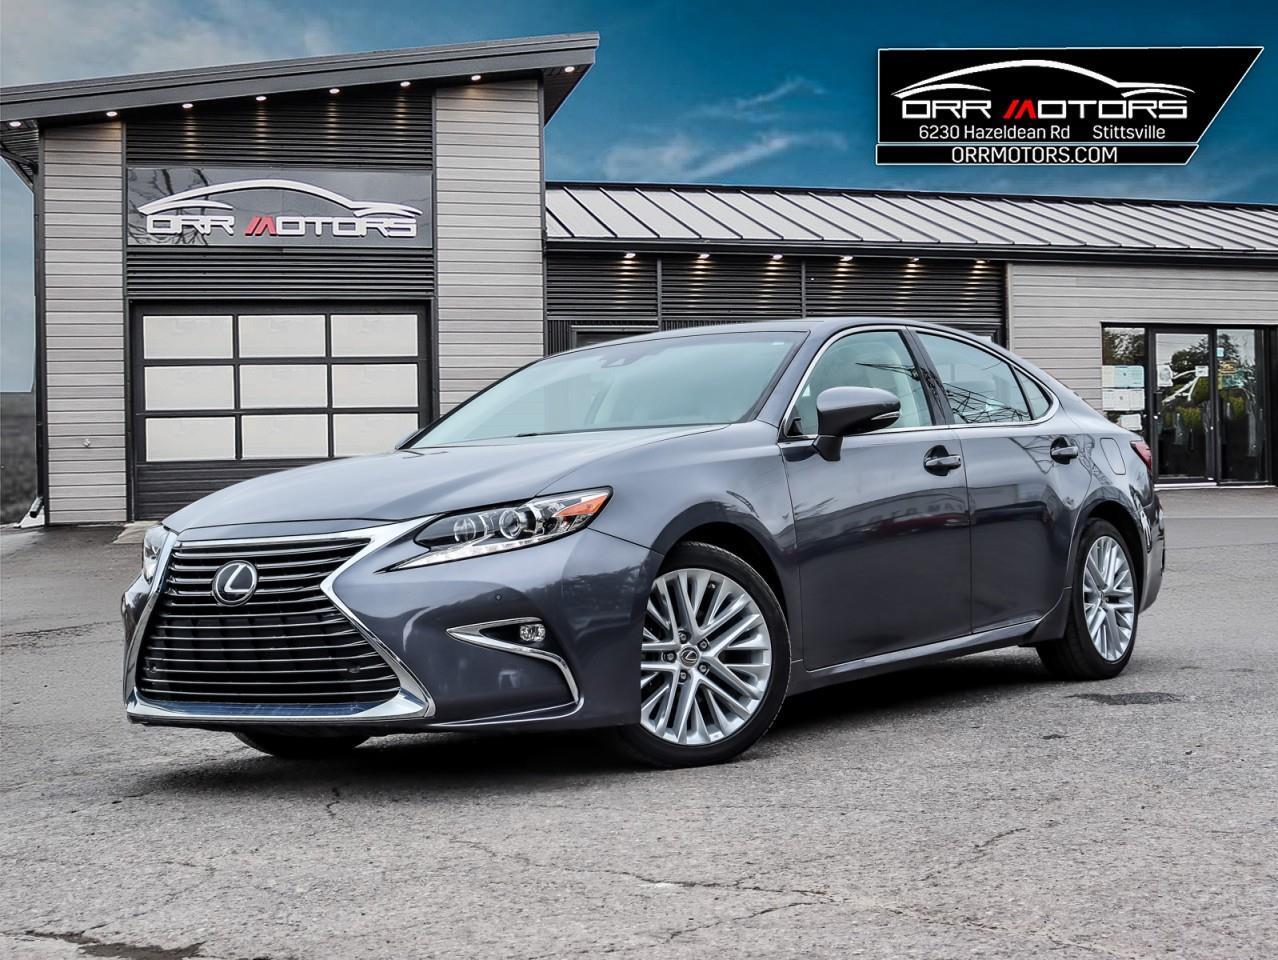 2016 Lexus ES 350 **JUST LANDED!!  - CALL NOW TO RESERVE**SUPER LOW 